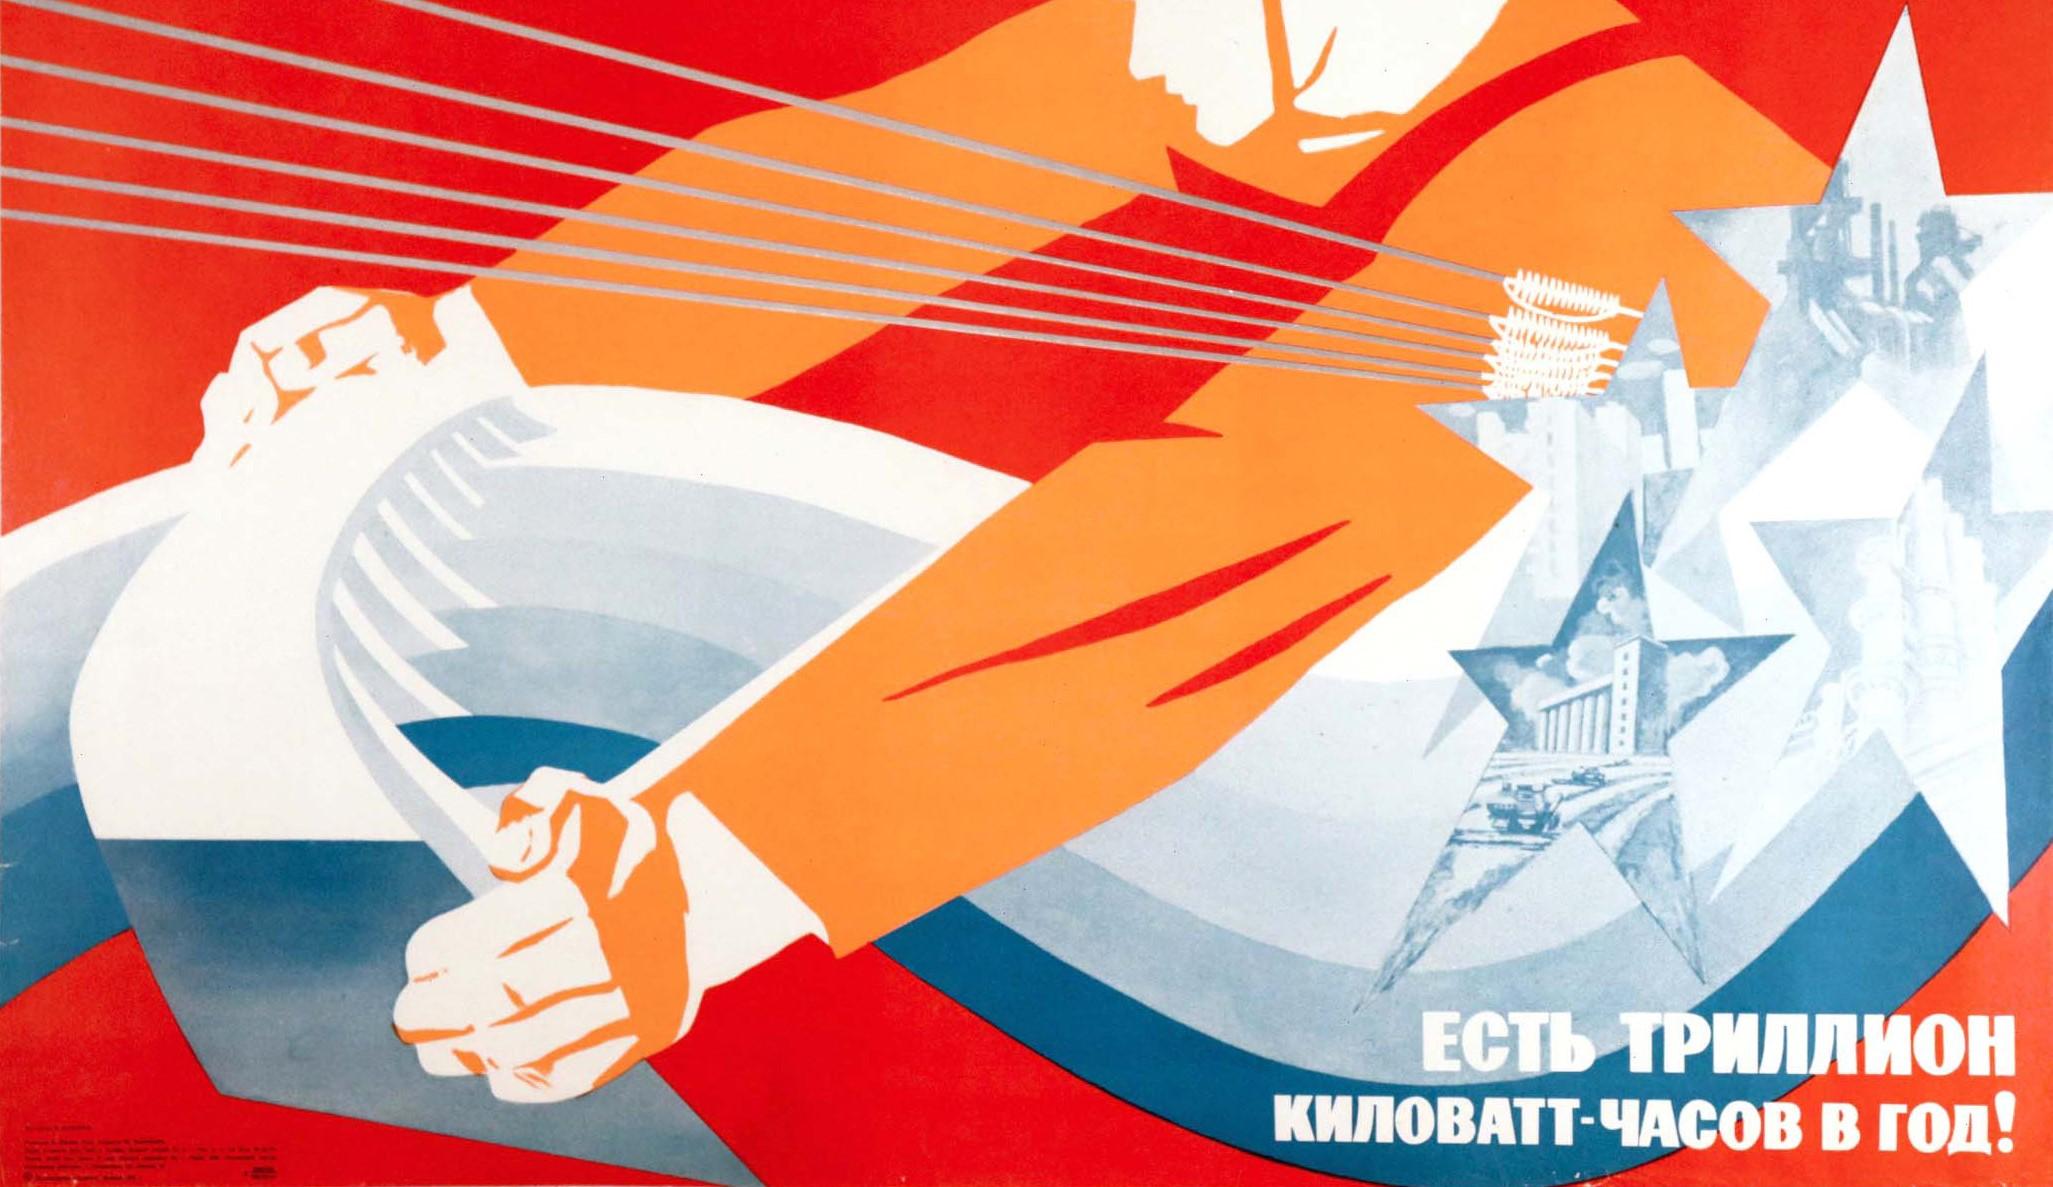 Affiche vintage d'origine Glory To The Soviet Power Engineers Electric Hydropower ( Glory To The Soviet Power Engineers) Bon état - En vente à London, GB